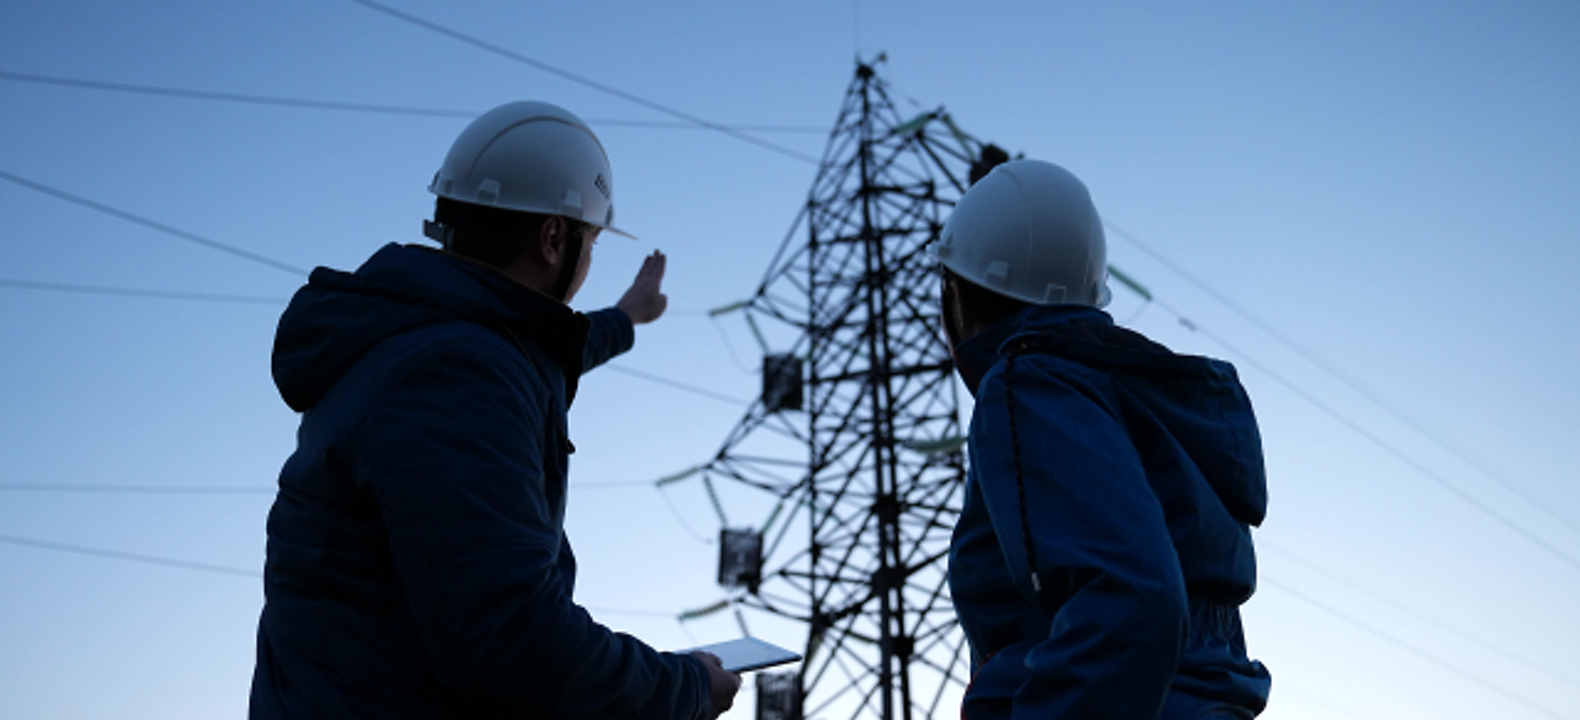 Two energy-utility technicians use a tablet while they evaluate a power-line pylon.